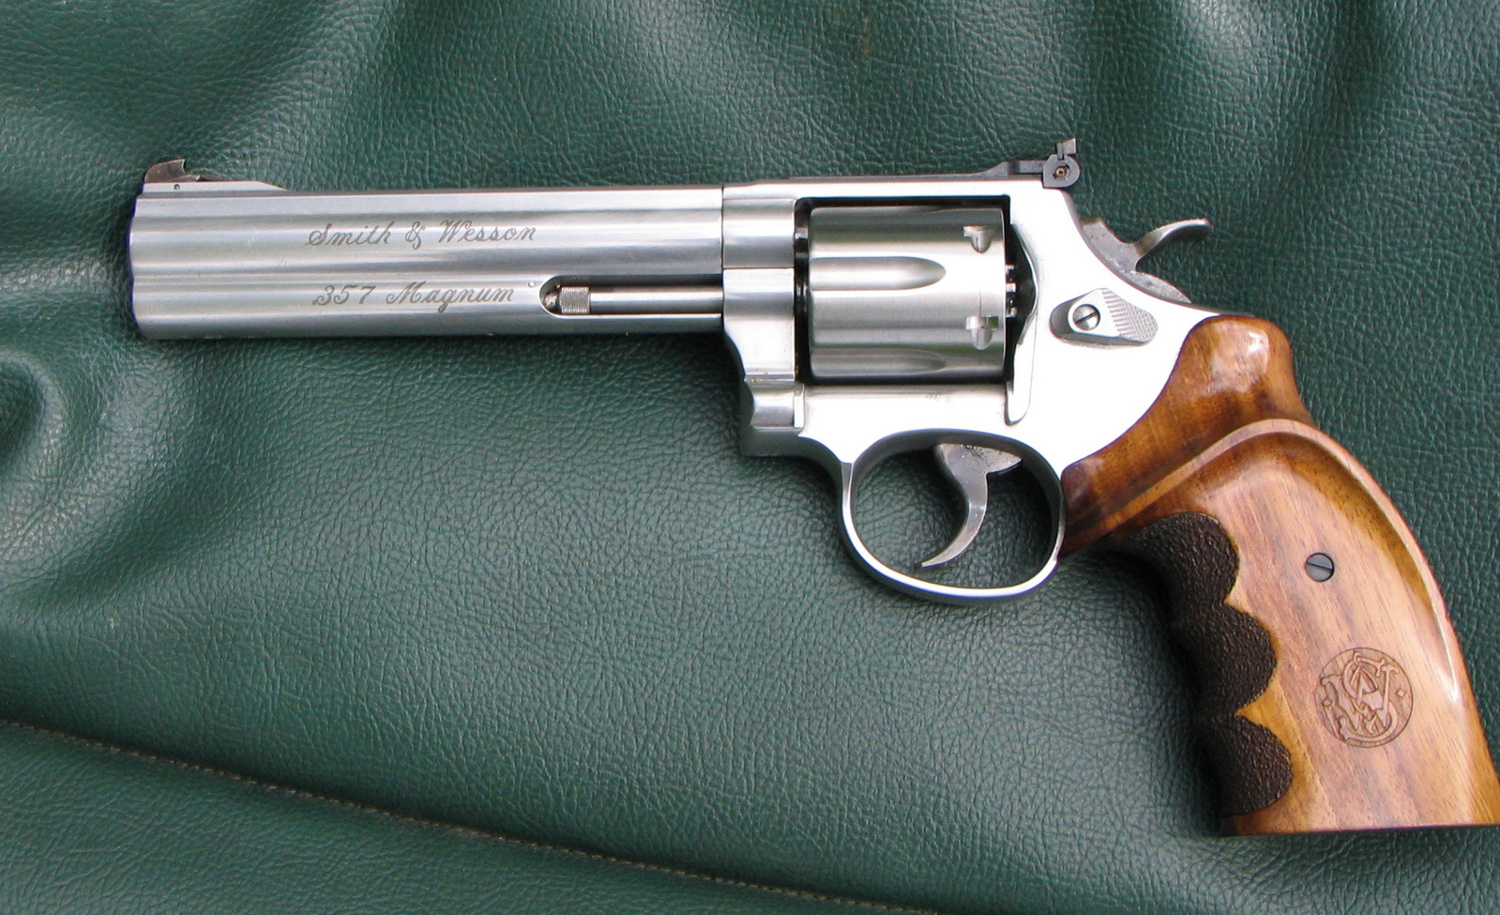 Smith & Wesson 357 Magnum Revolver Pics, Weapons Collection